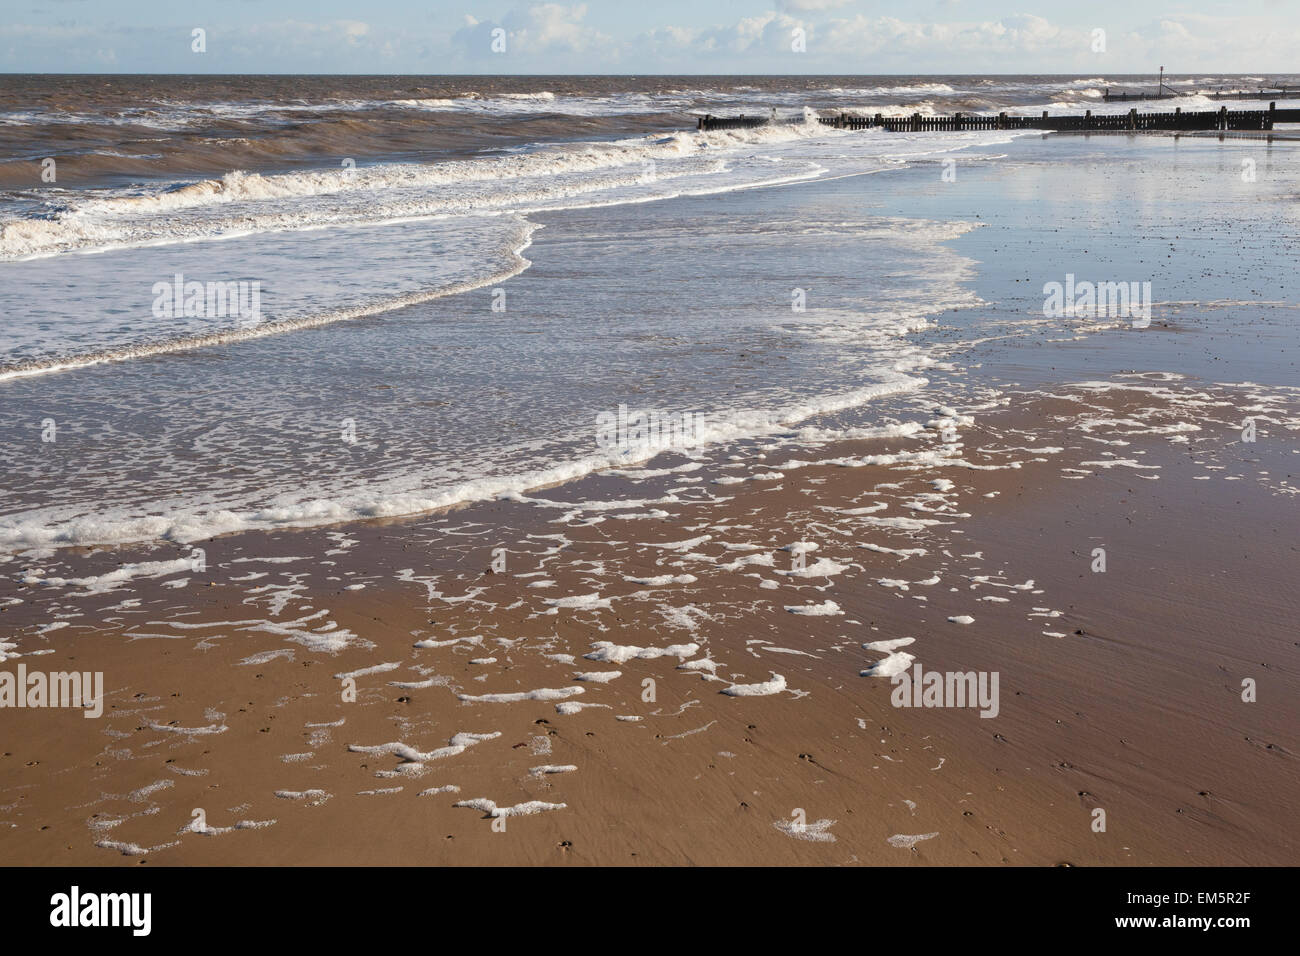 A blustery winter day at Walcott beach, Norfolk England UK. Foam blowing off the sea. Stock Photo